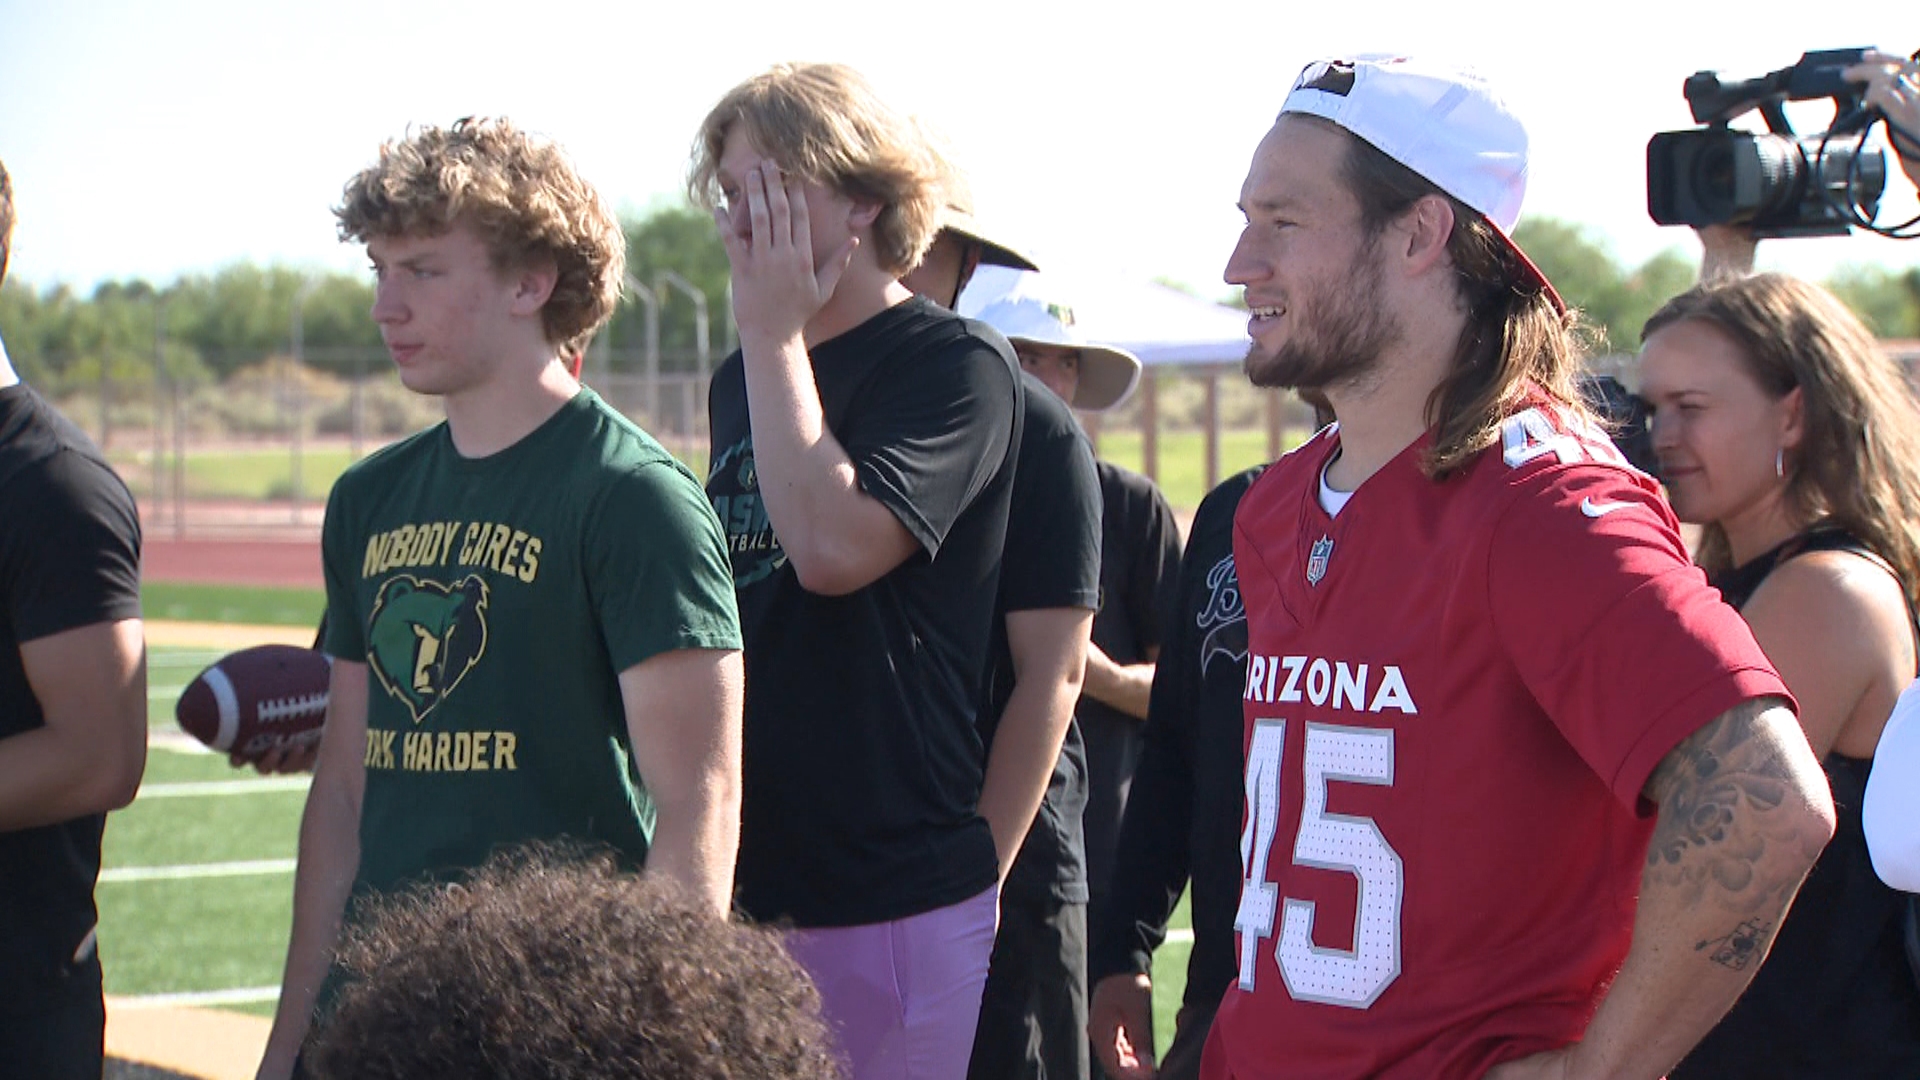 Cardinals linebacker Dennis Gardeck and tight end Trey McBride held a football camp at Basha High School in Chandler on Saturday. 12News was there to check it out!